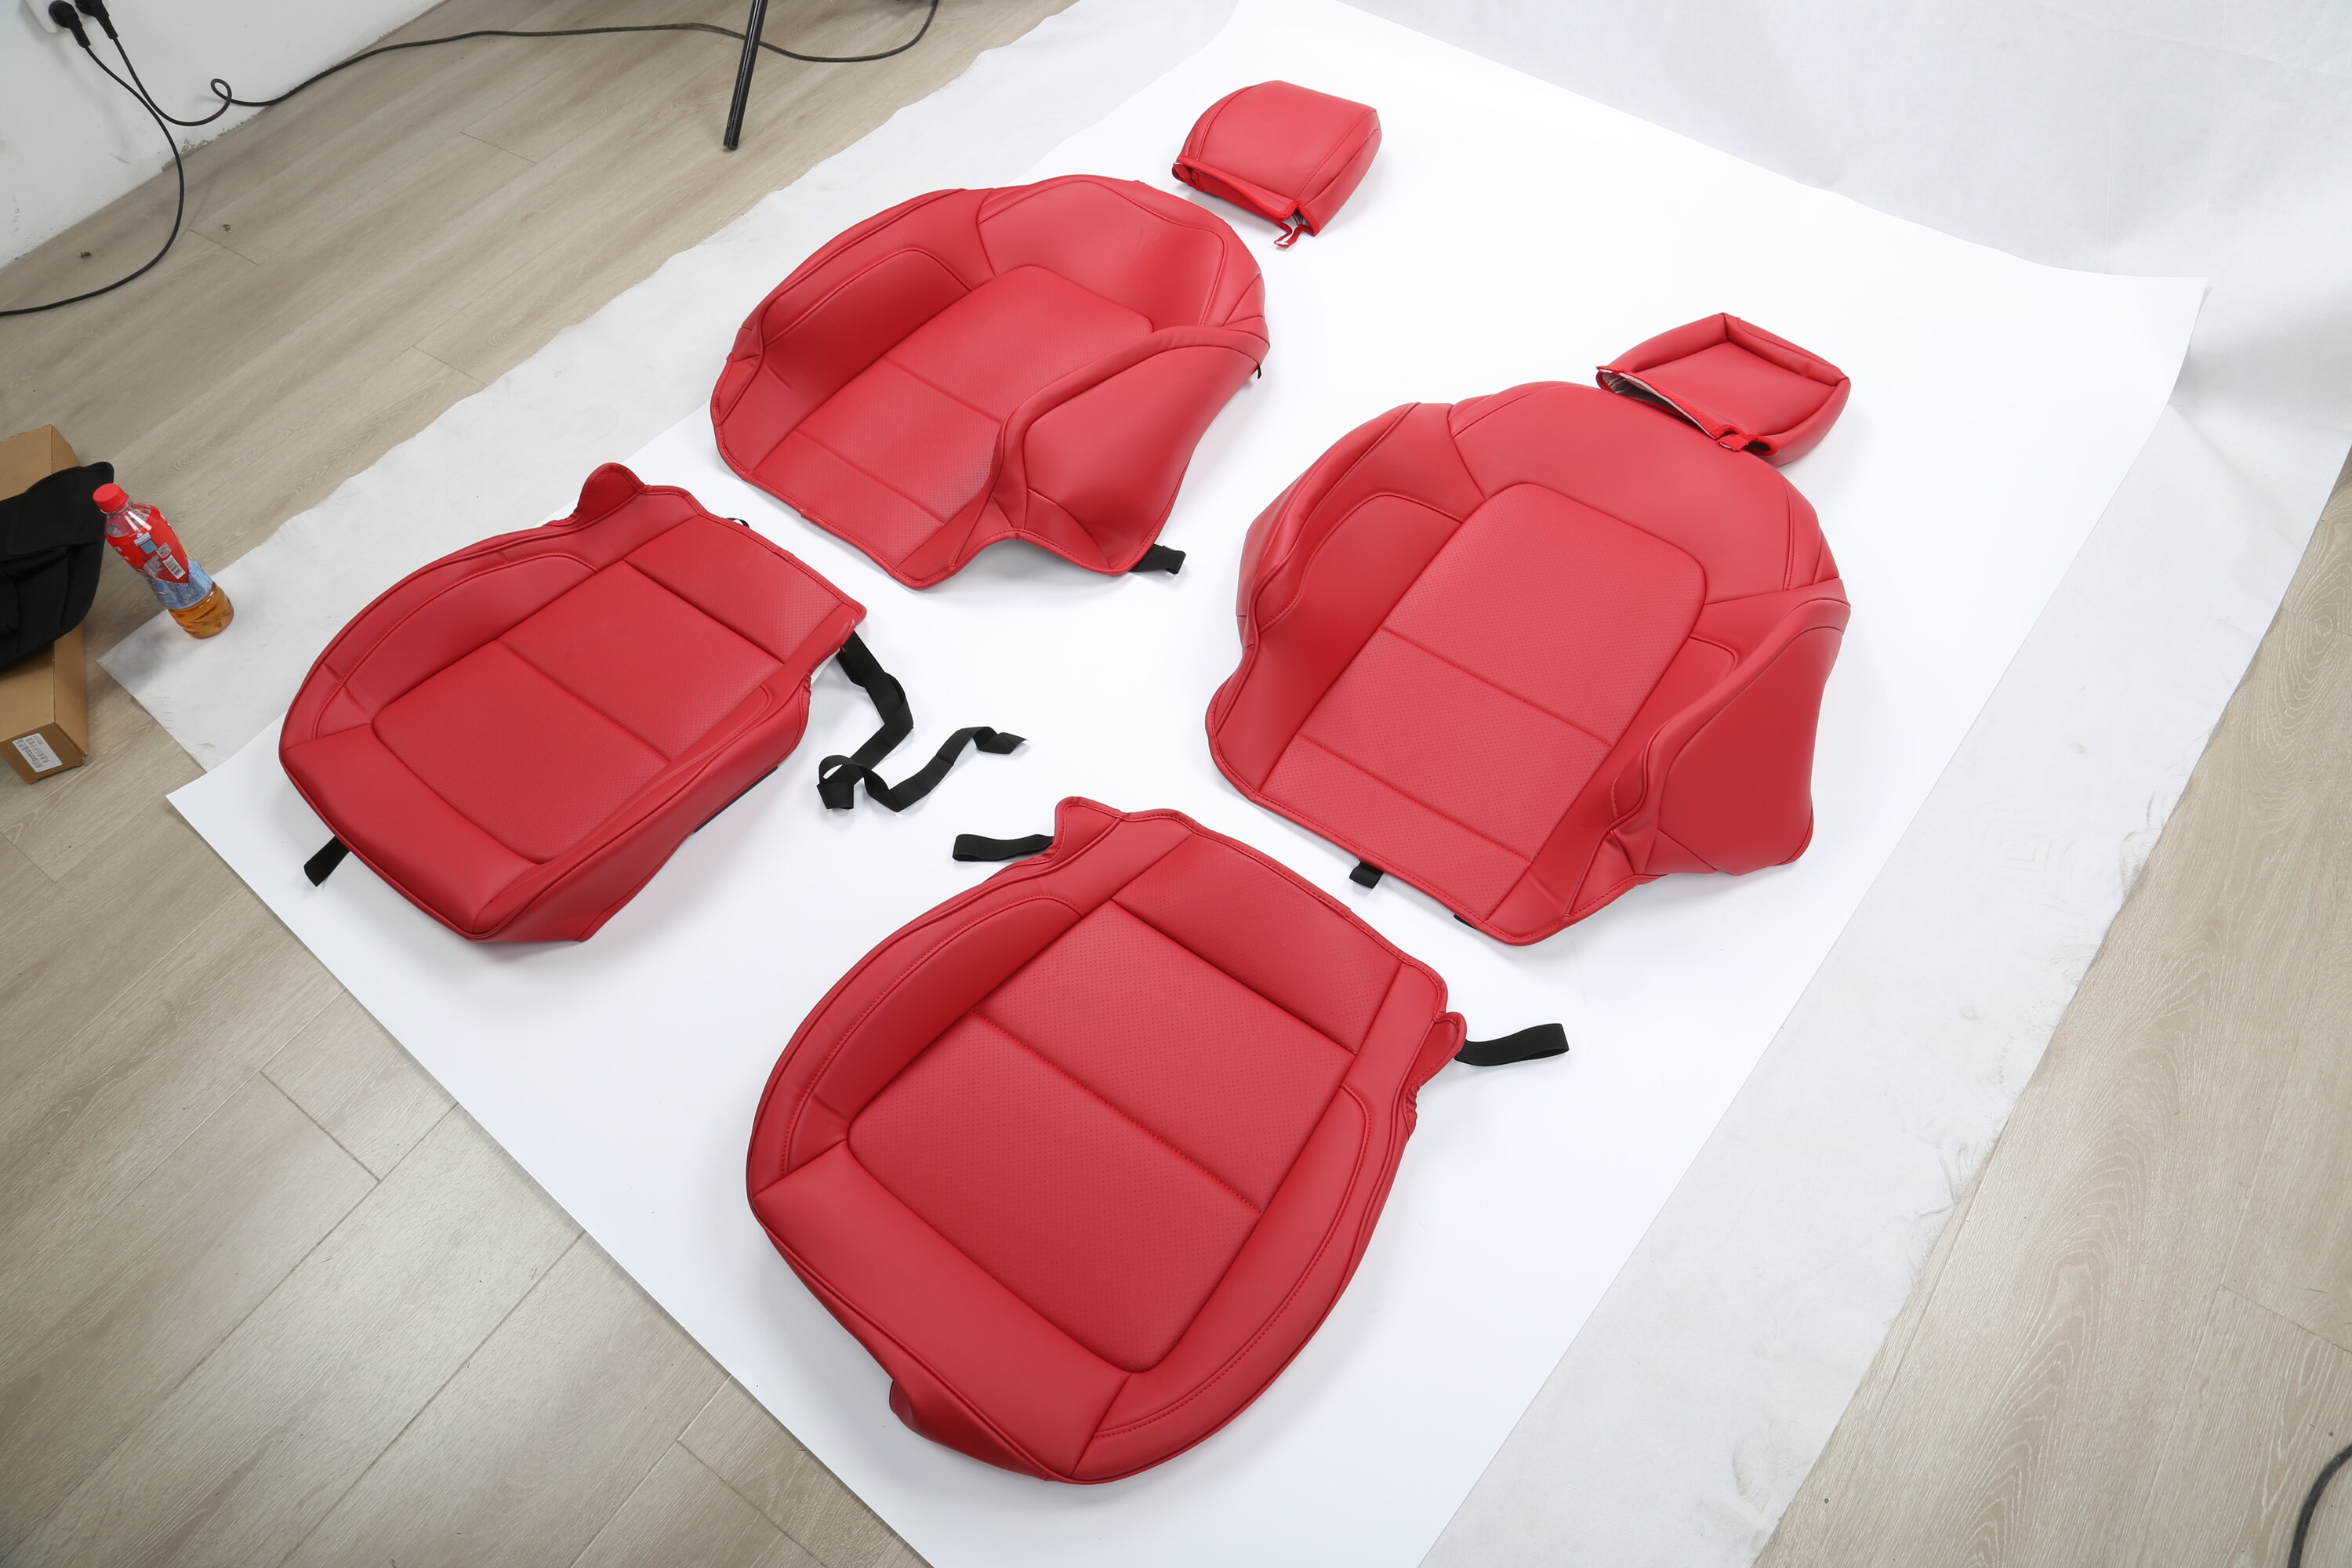 Ford Bronco Mabett Seat Covers Available Now IMG_2160.JPG